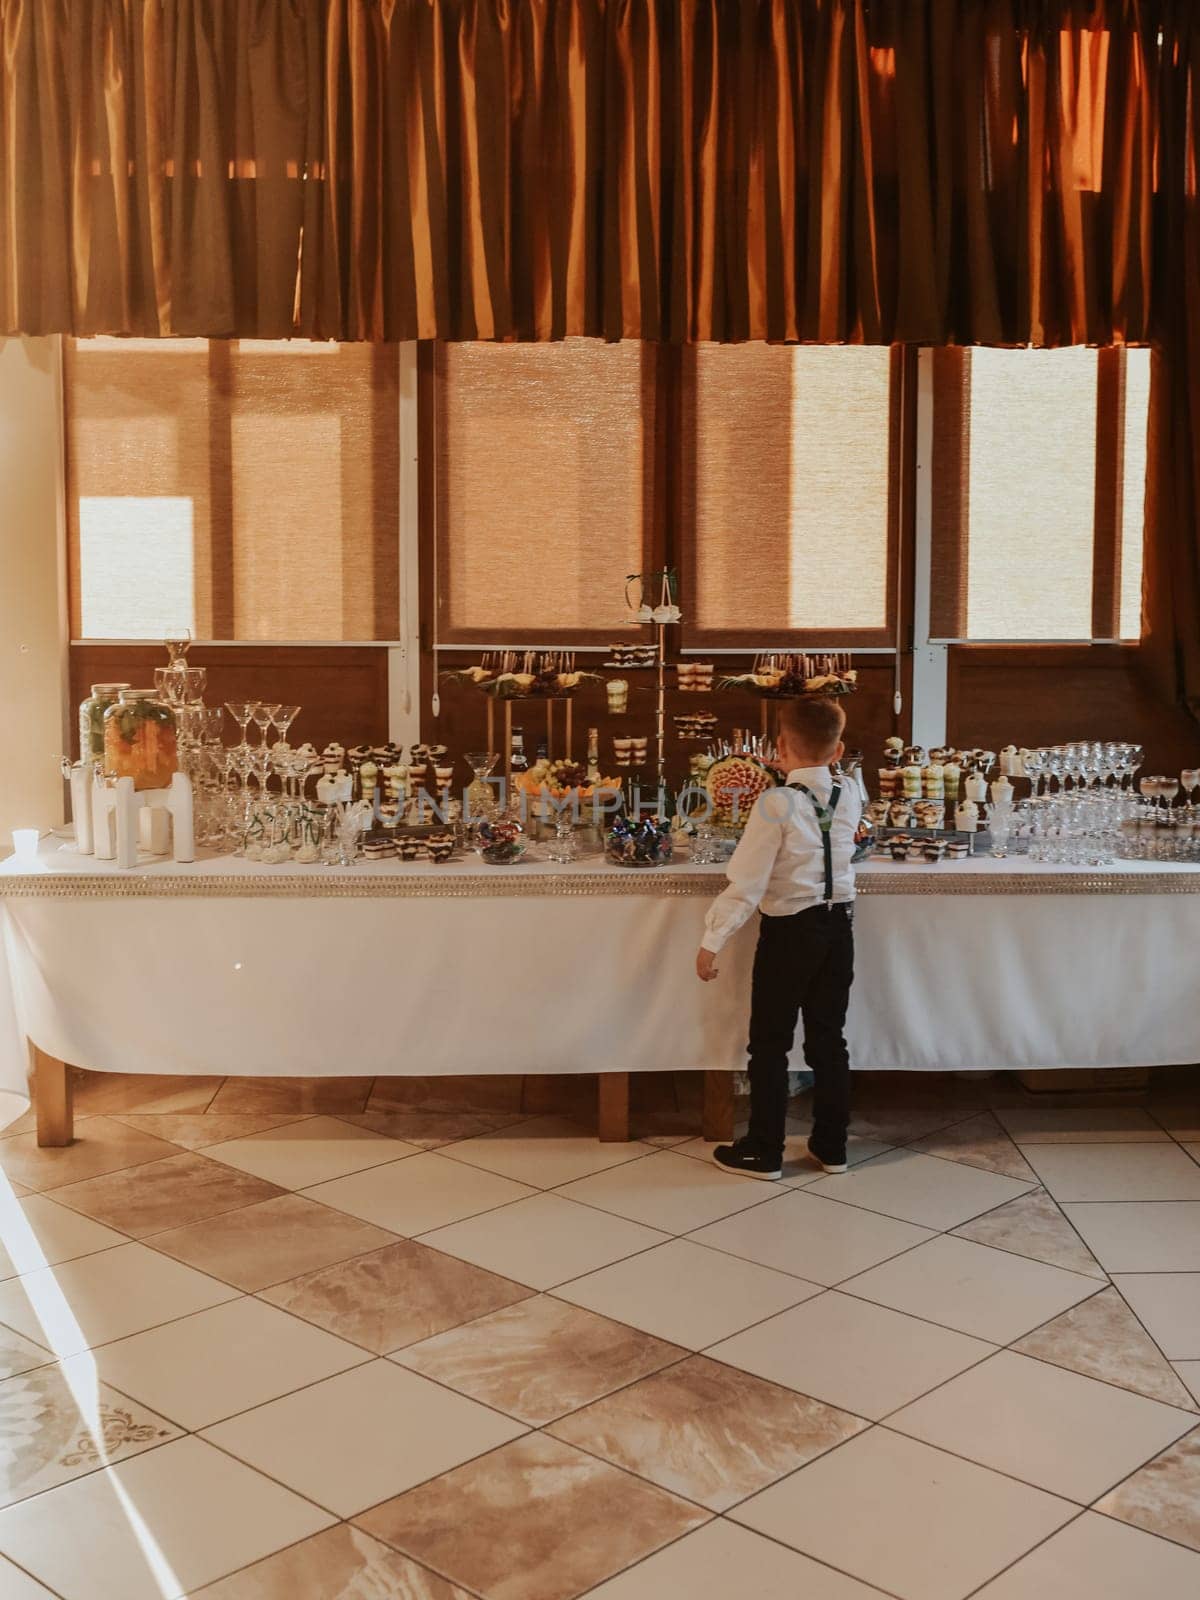 Boy stand eating near catering wedding buffet for events. Beautifully decorated catering banquet table food snacks and appetizers with sandwich. decorated catering banquet table burgers profiteroles